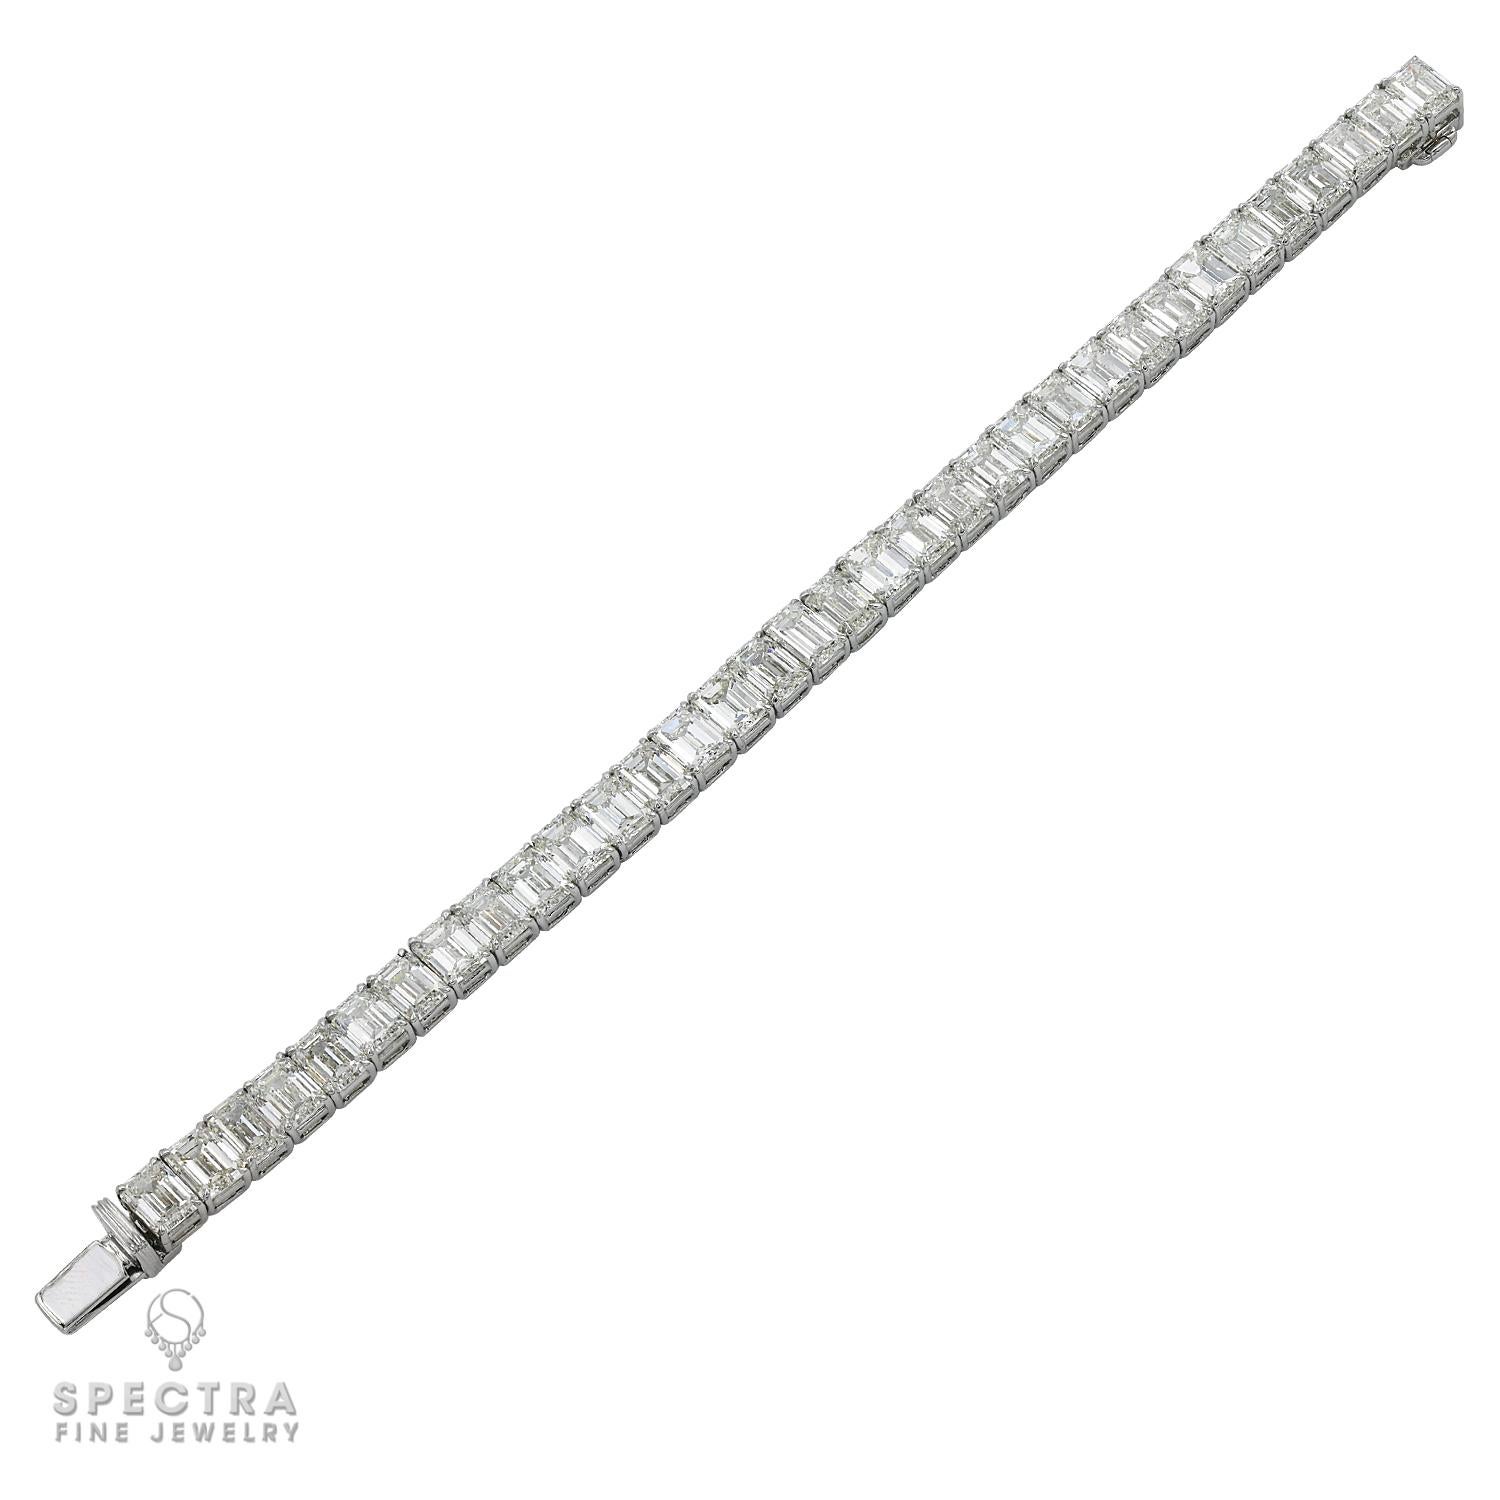 A classy tennis bracelet comprising of 34 emerald-cut diamonds weighing a total of 34.71 carats; 1 carat each. 
The diamonds are certified by GIA lab, stating that they are with I-J color, IF-SI1 clarity.
Metal is 18k white gold; gross weight is